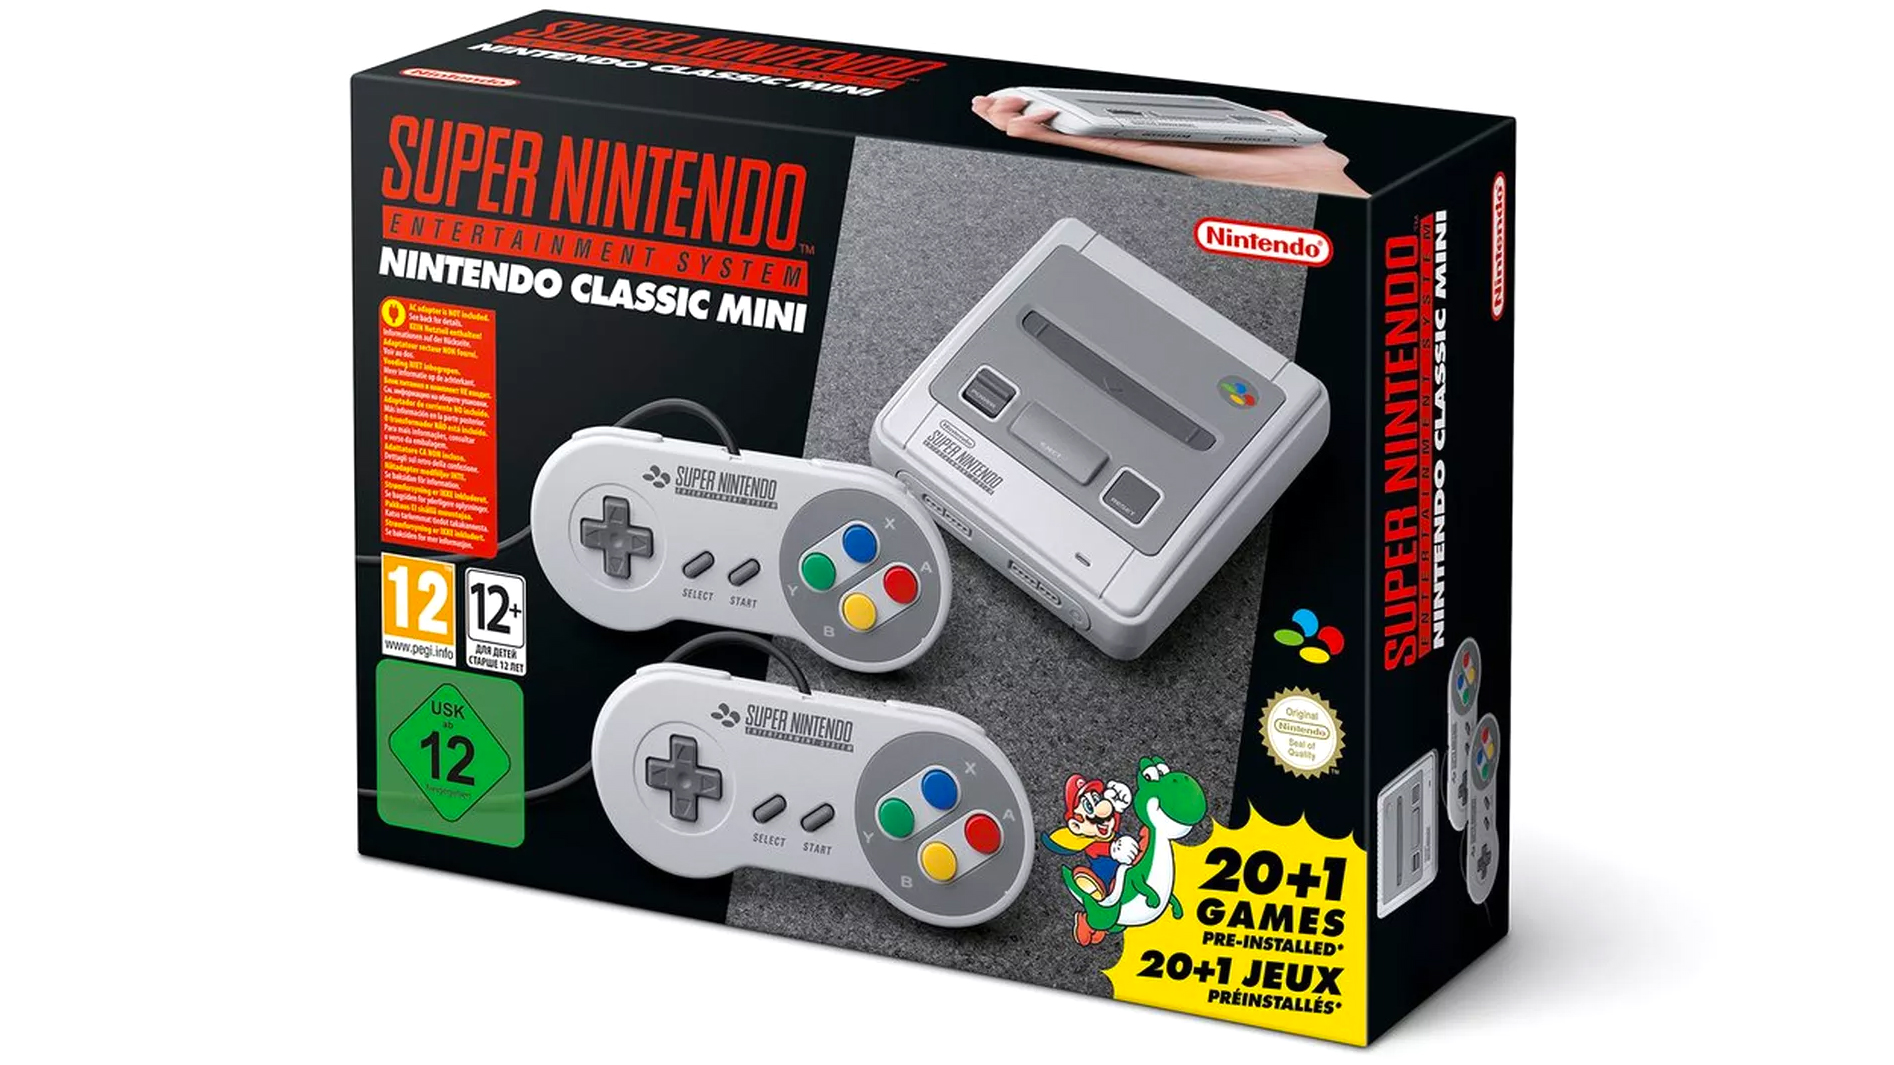 Super Nintendo Classic Edition Arrives September 30 With 21 Games [Updated]